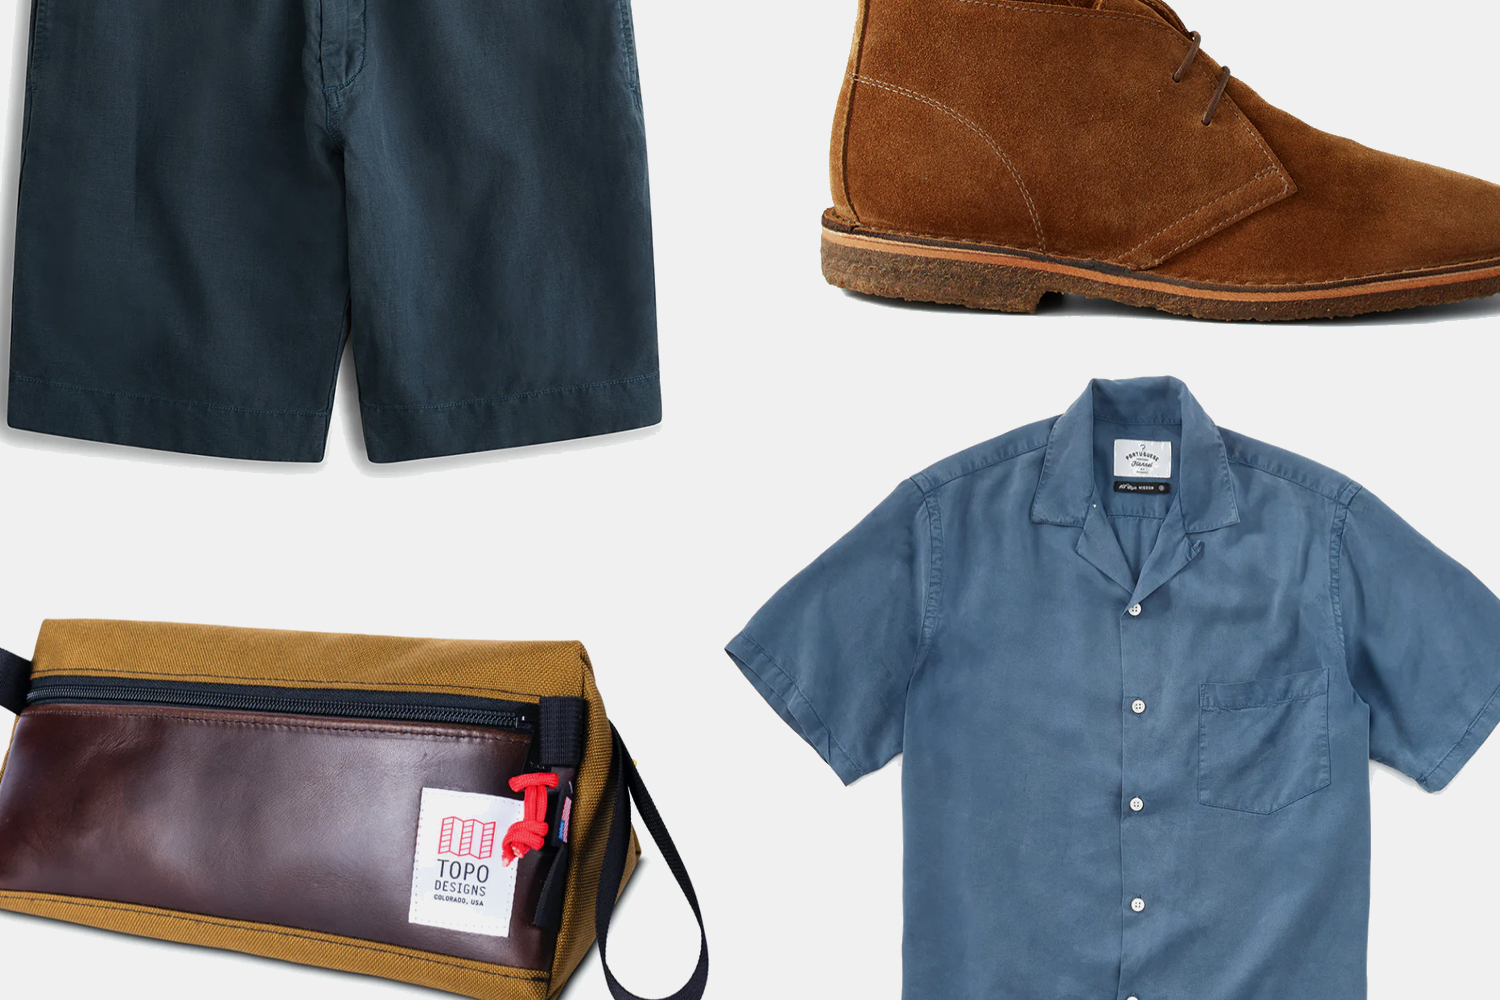 Huckberry's Annual Summer Sale Has Arrived. Here's What to Buy.